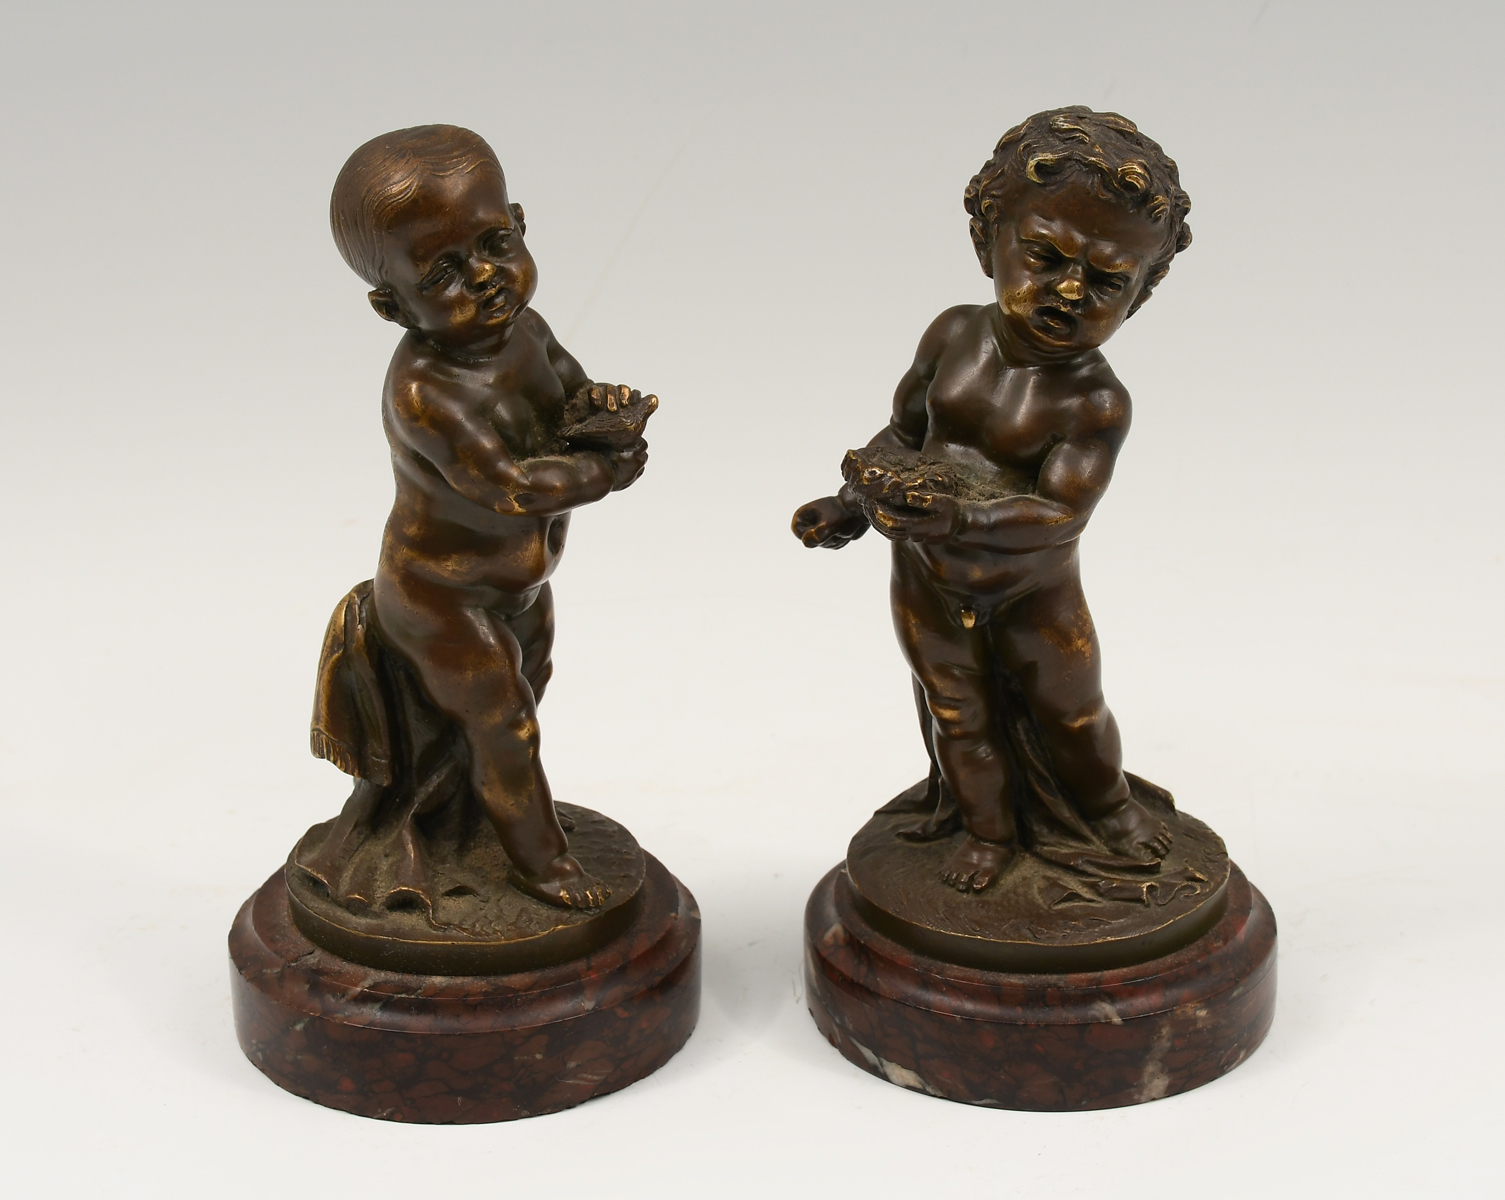 TWO BRONZE BABY SCULPTURES BY PIGALLE  2ed186